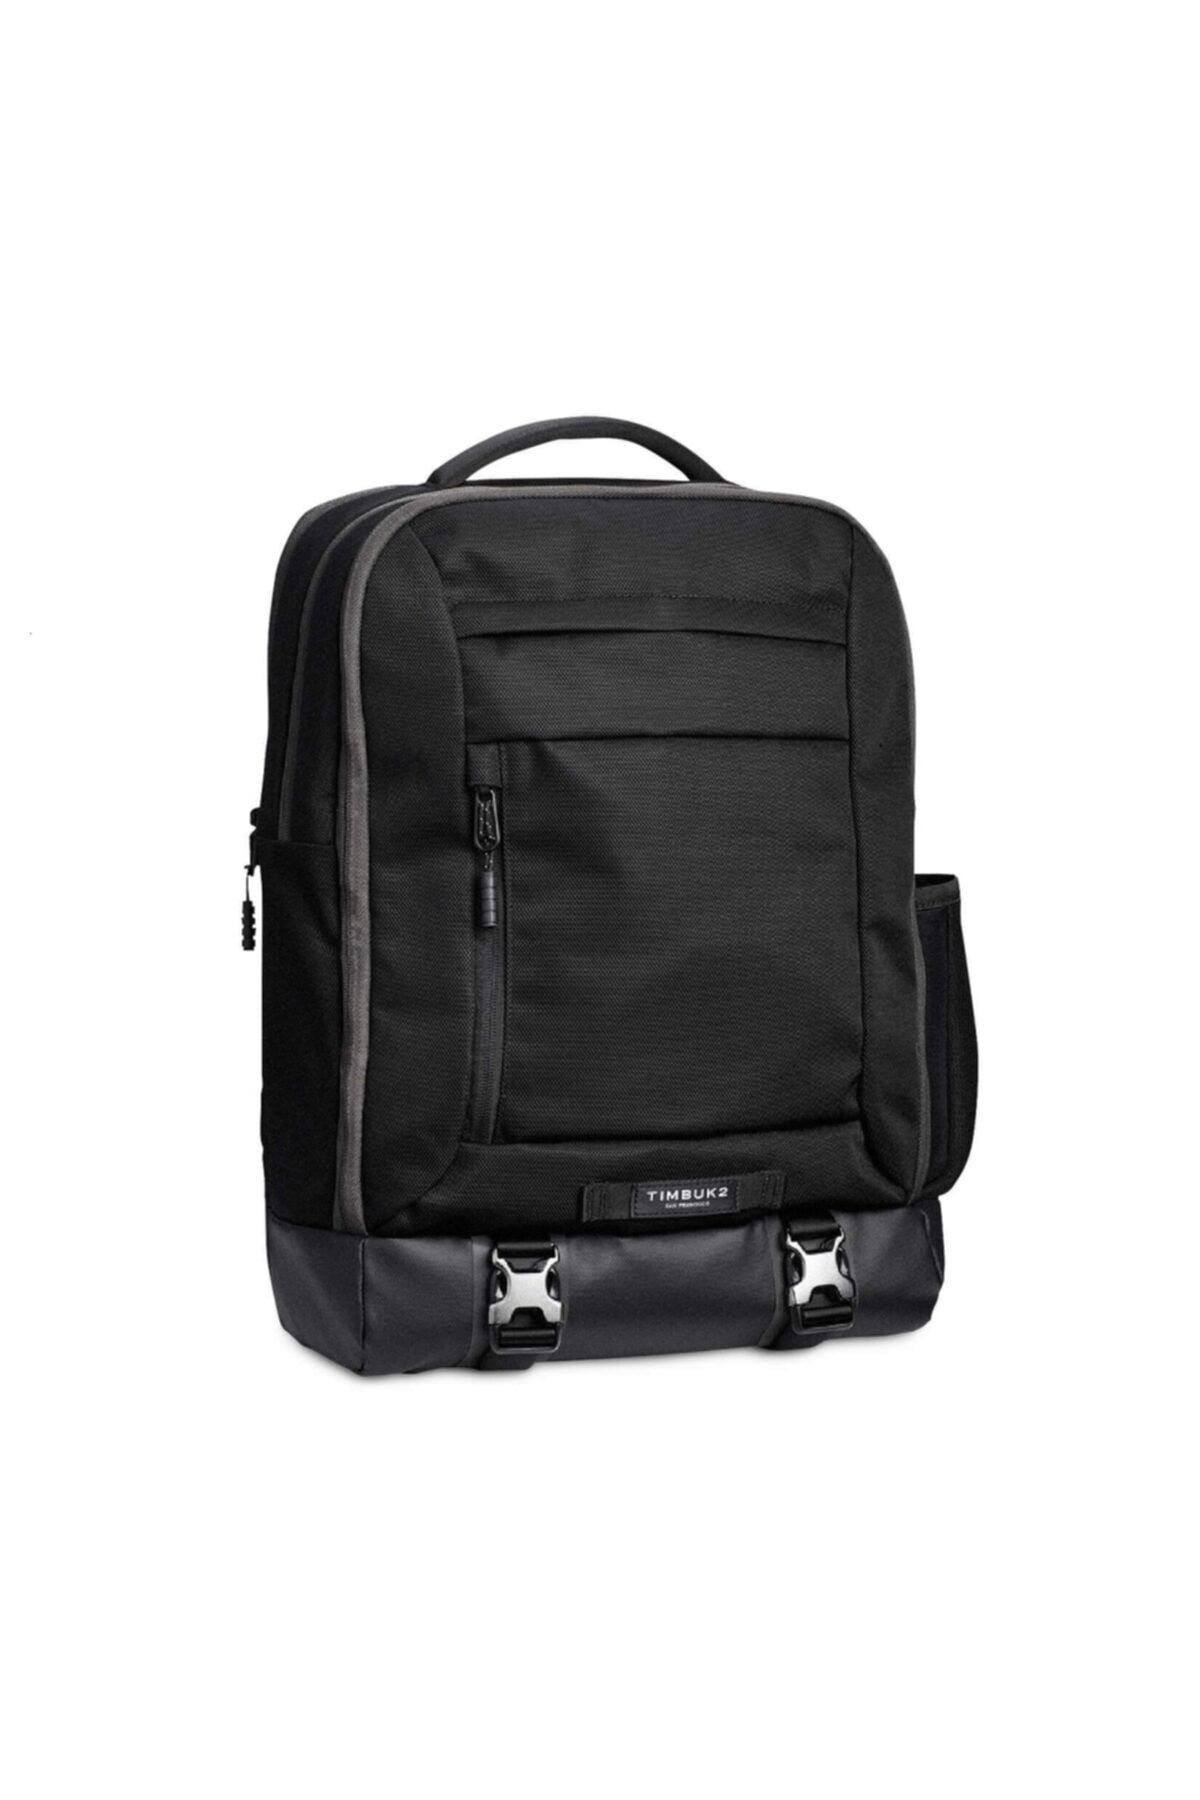 Dell Timbuk2 Authority 15.6" Backpack 460-bckg